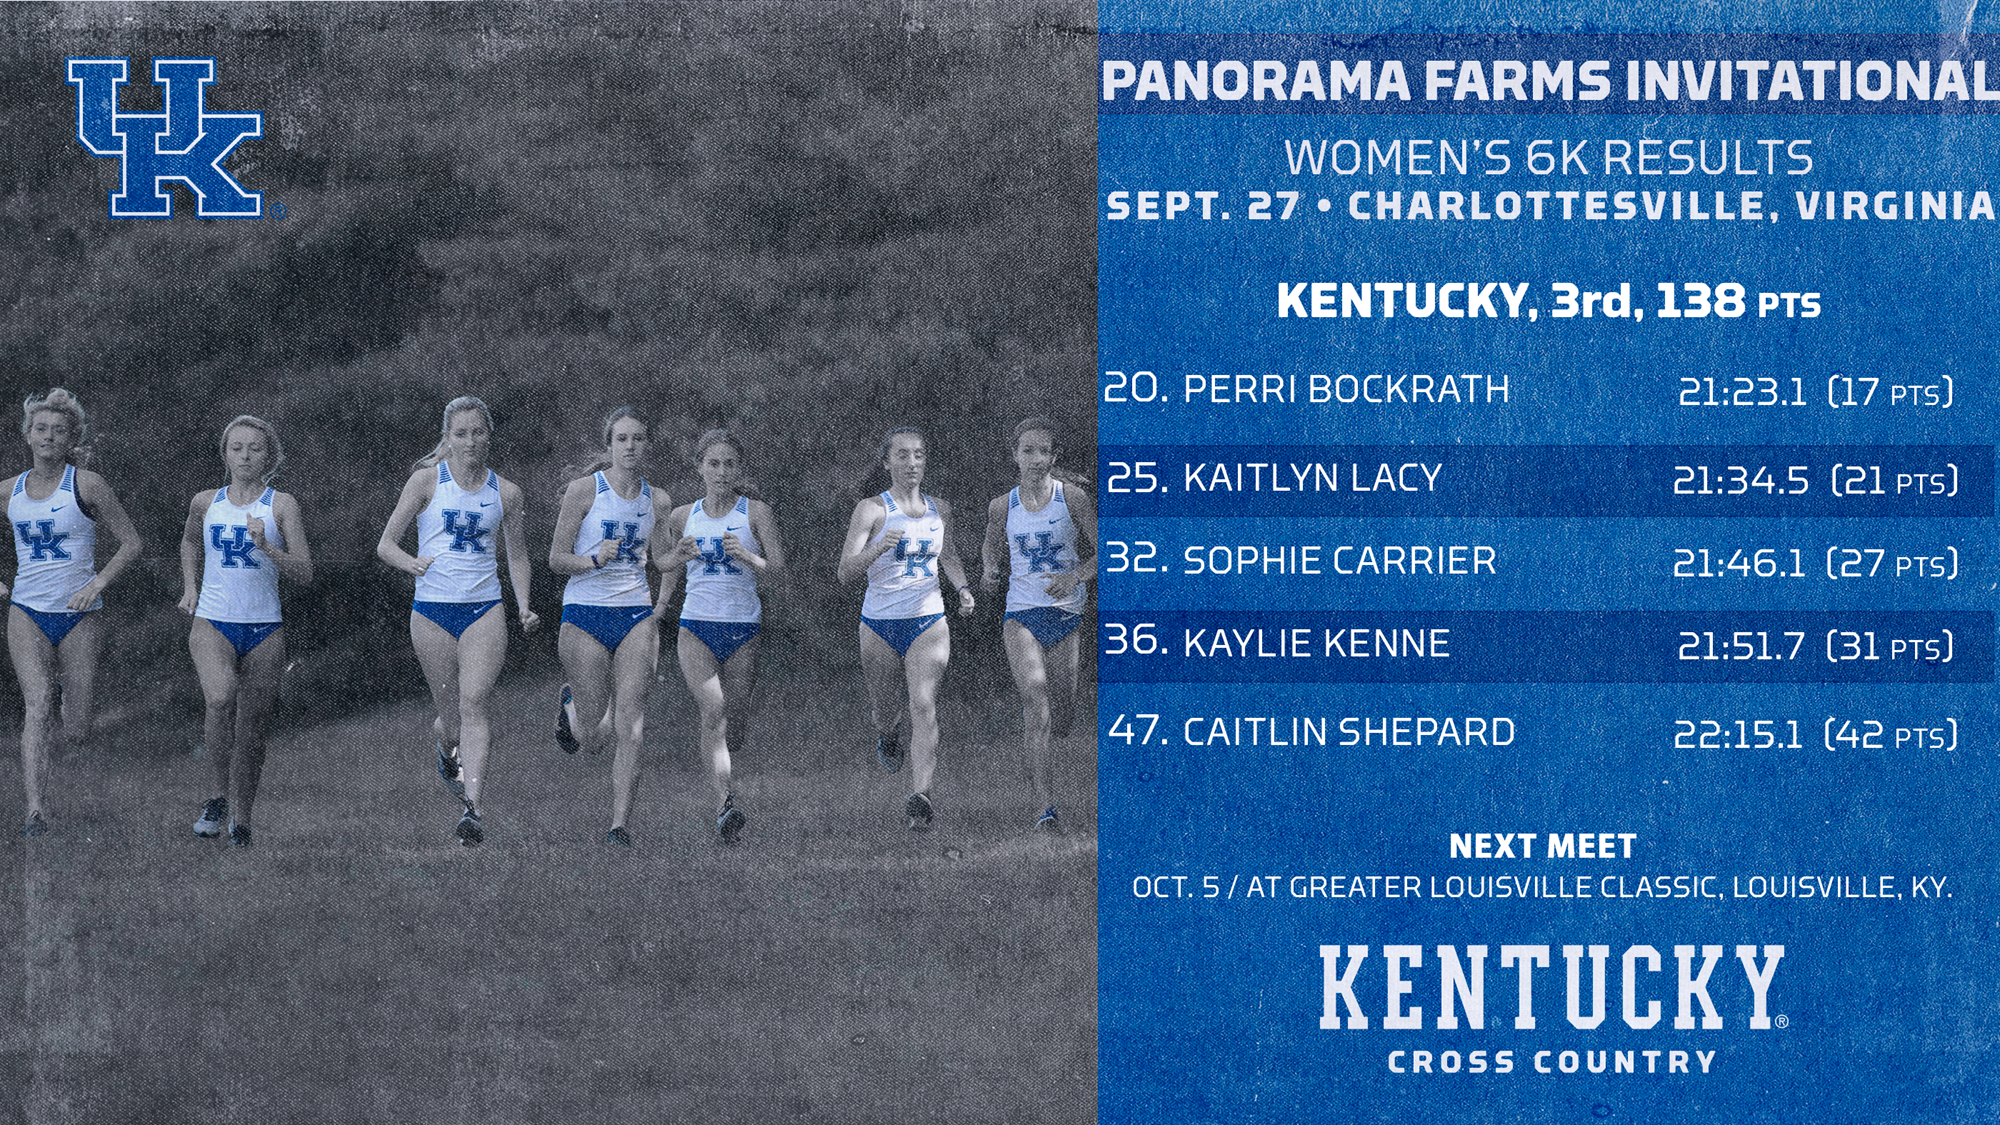 Kentucky Cross Country Finishes 3rd and 6th at Panorama Farms Invitational